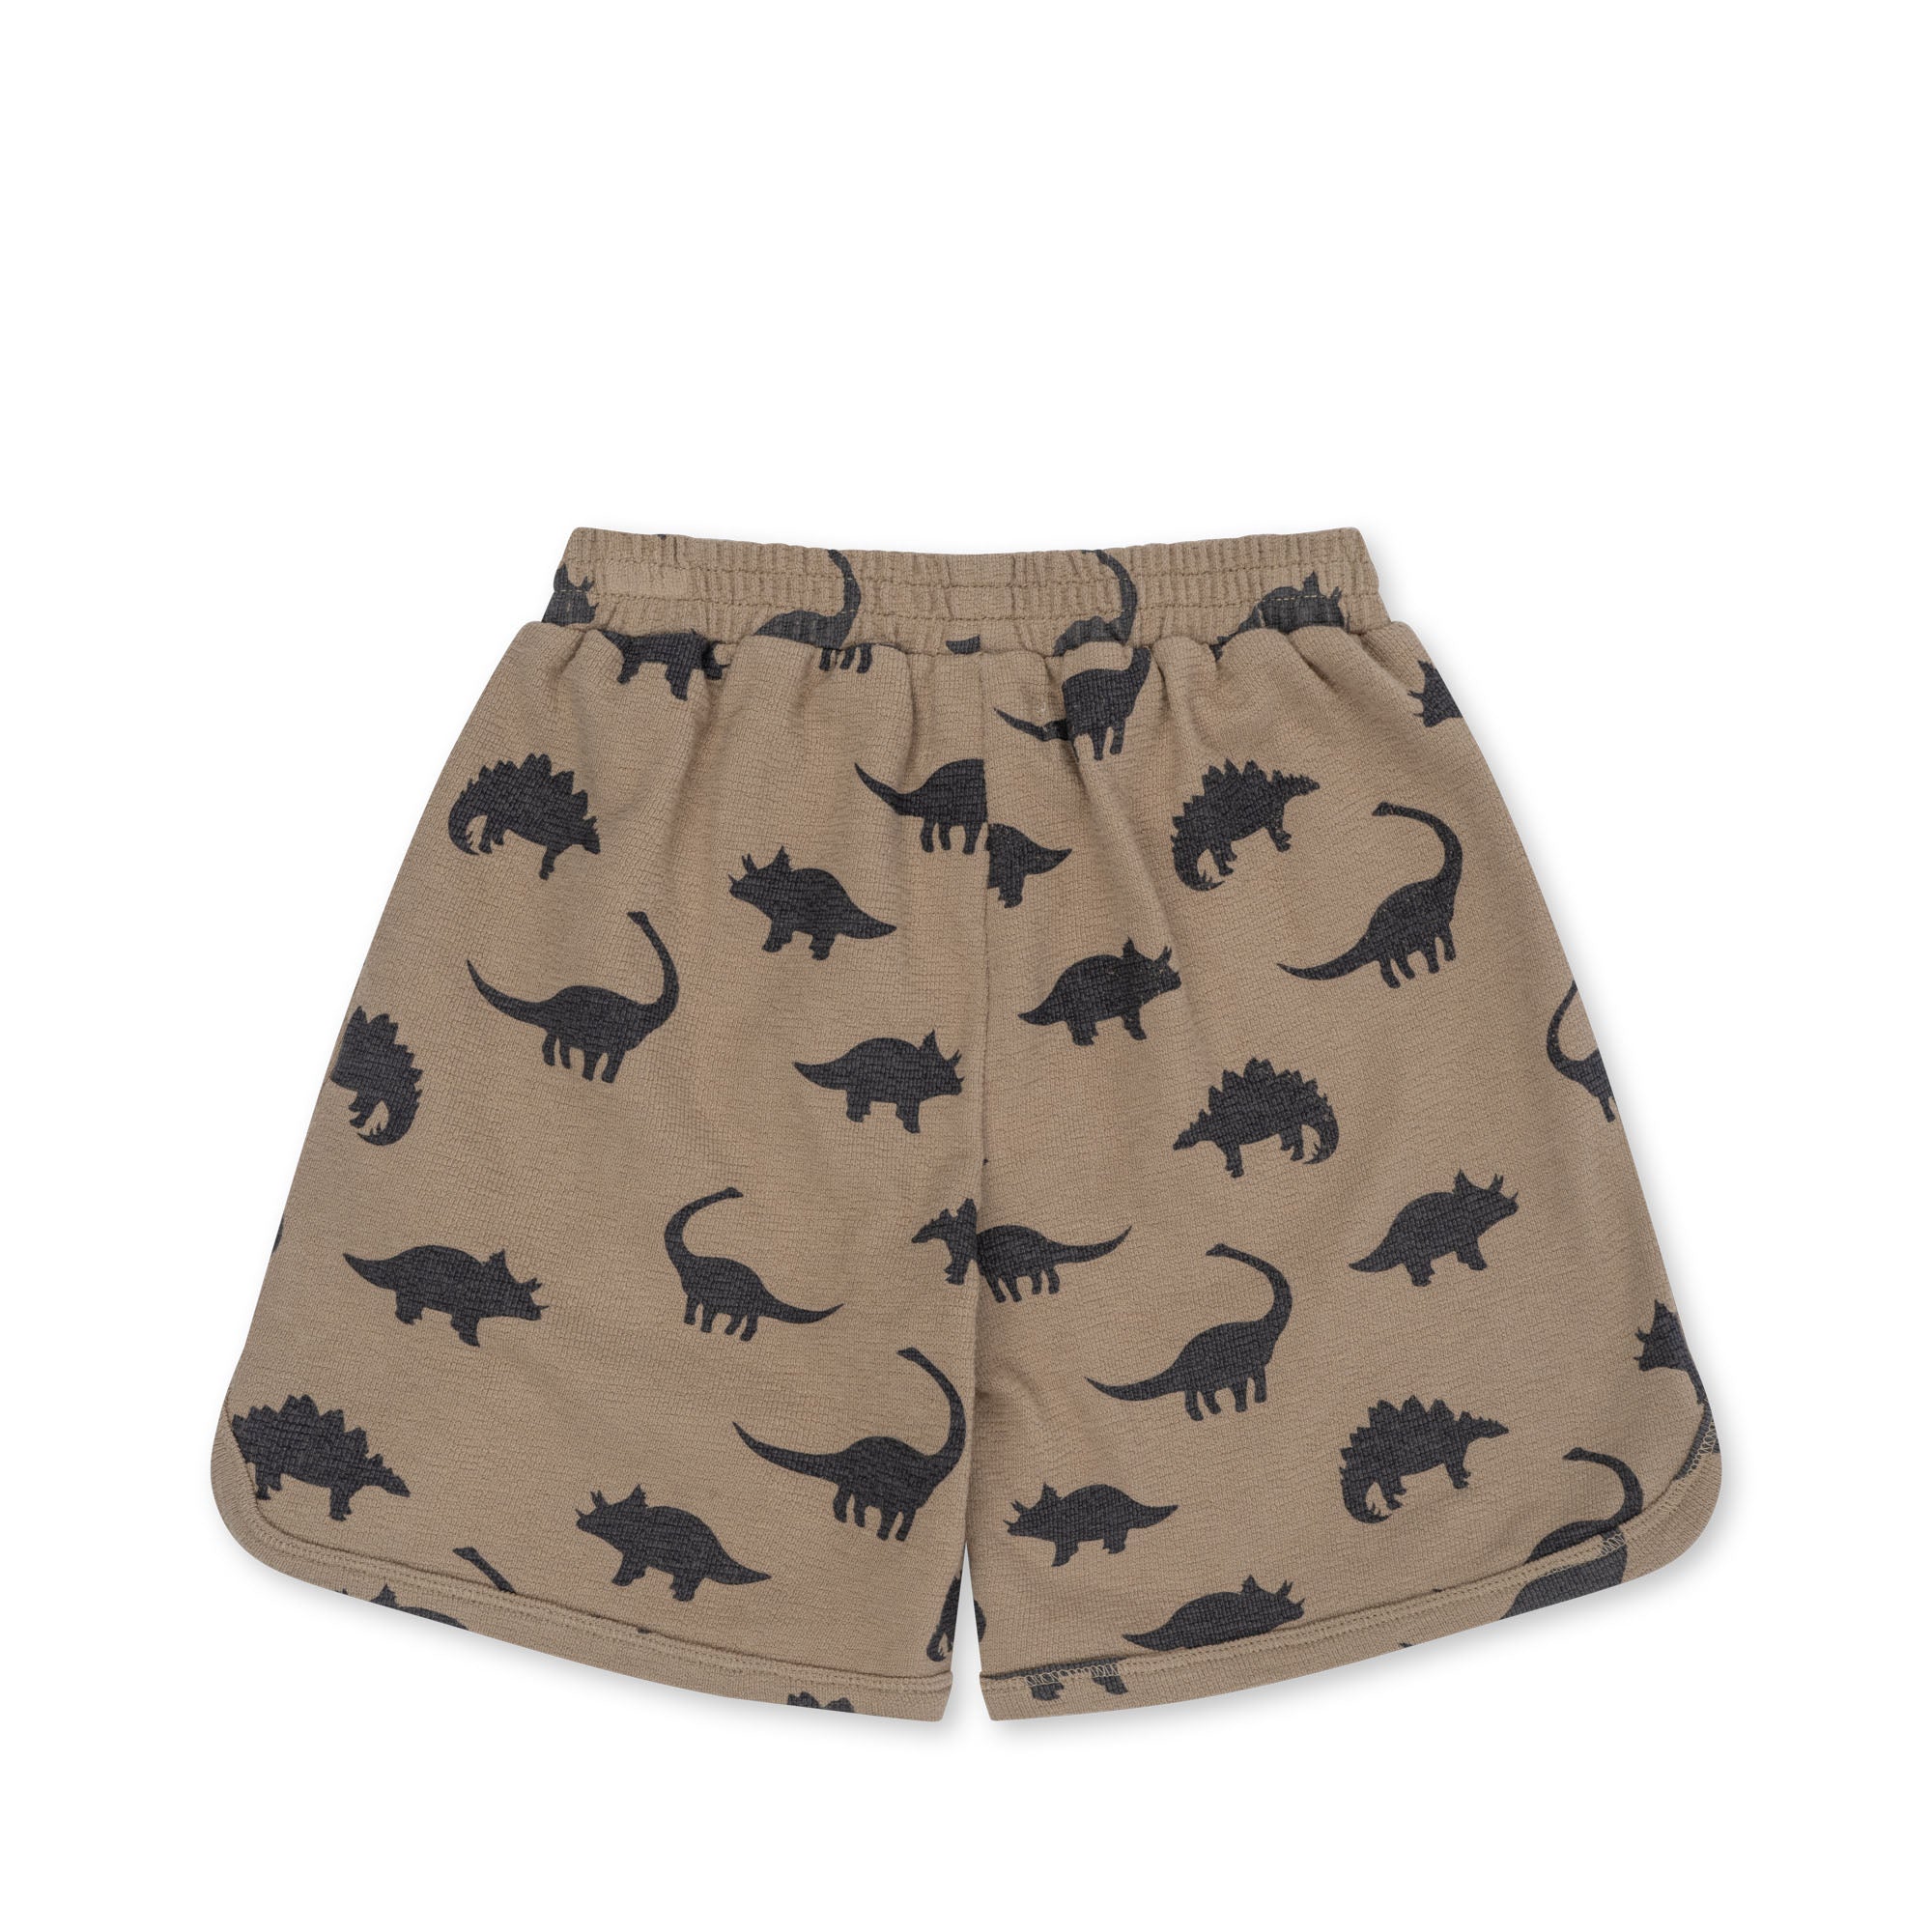 Konges Sløjd A/S Shorts og bloomers - Jersey dino silhouette